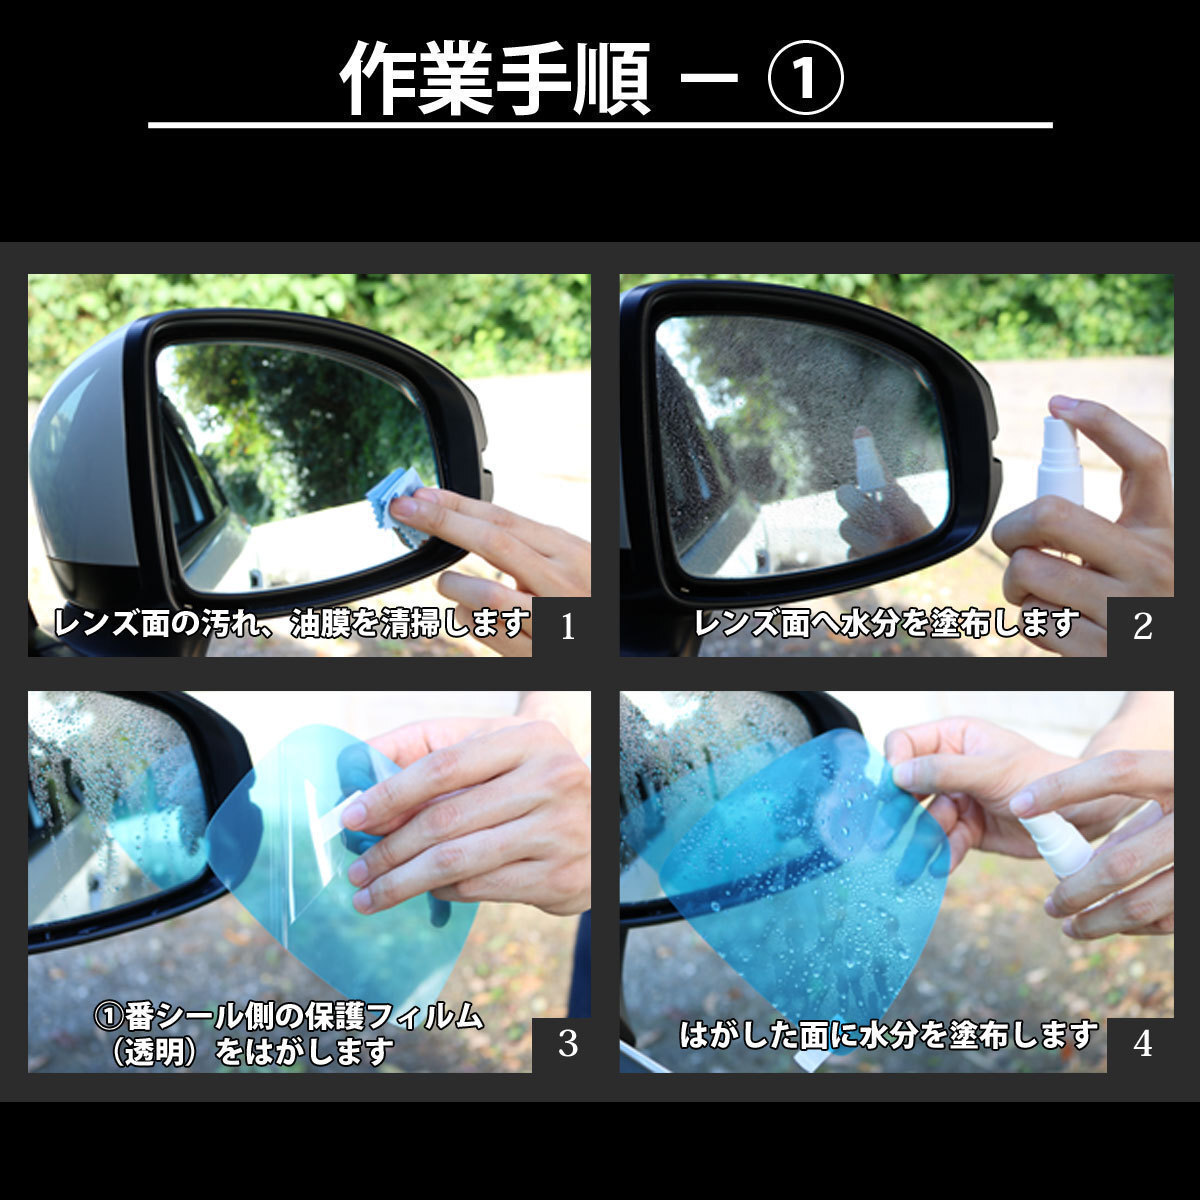  car make exclusive use Benz W210 for latter term left steering wheel car exclusive use water-repellent door mirror film left right set water-repellent effect 6 months shipping deadline 18 hour 